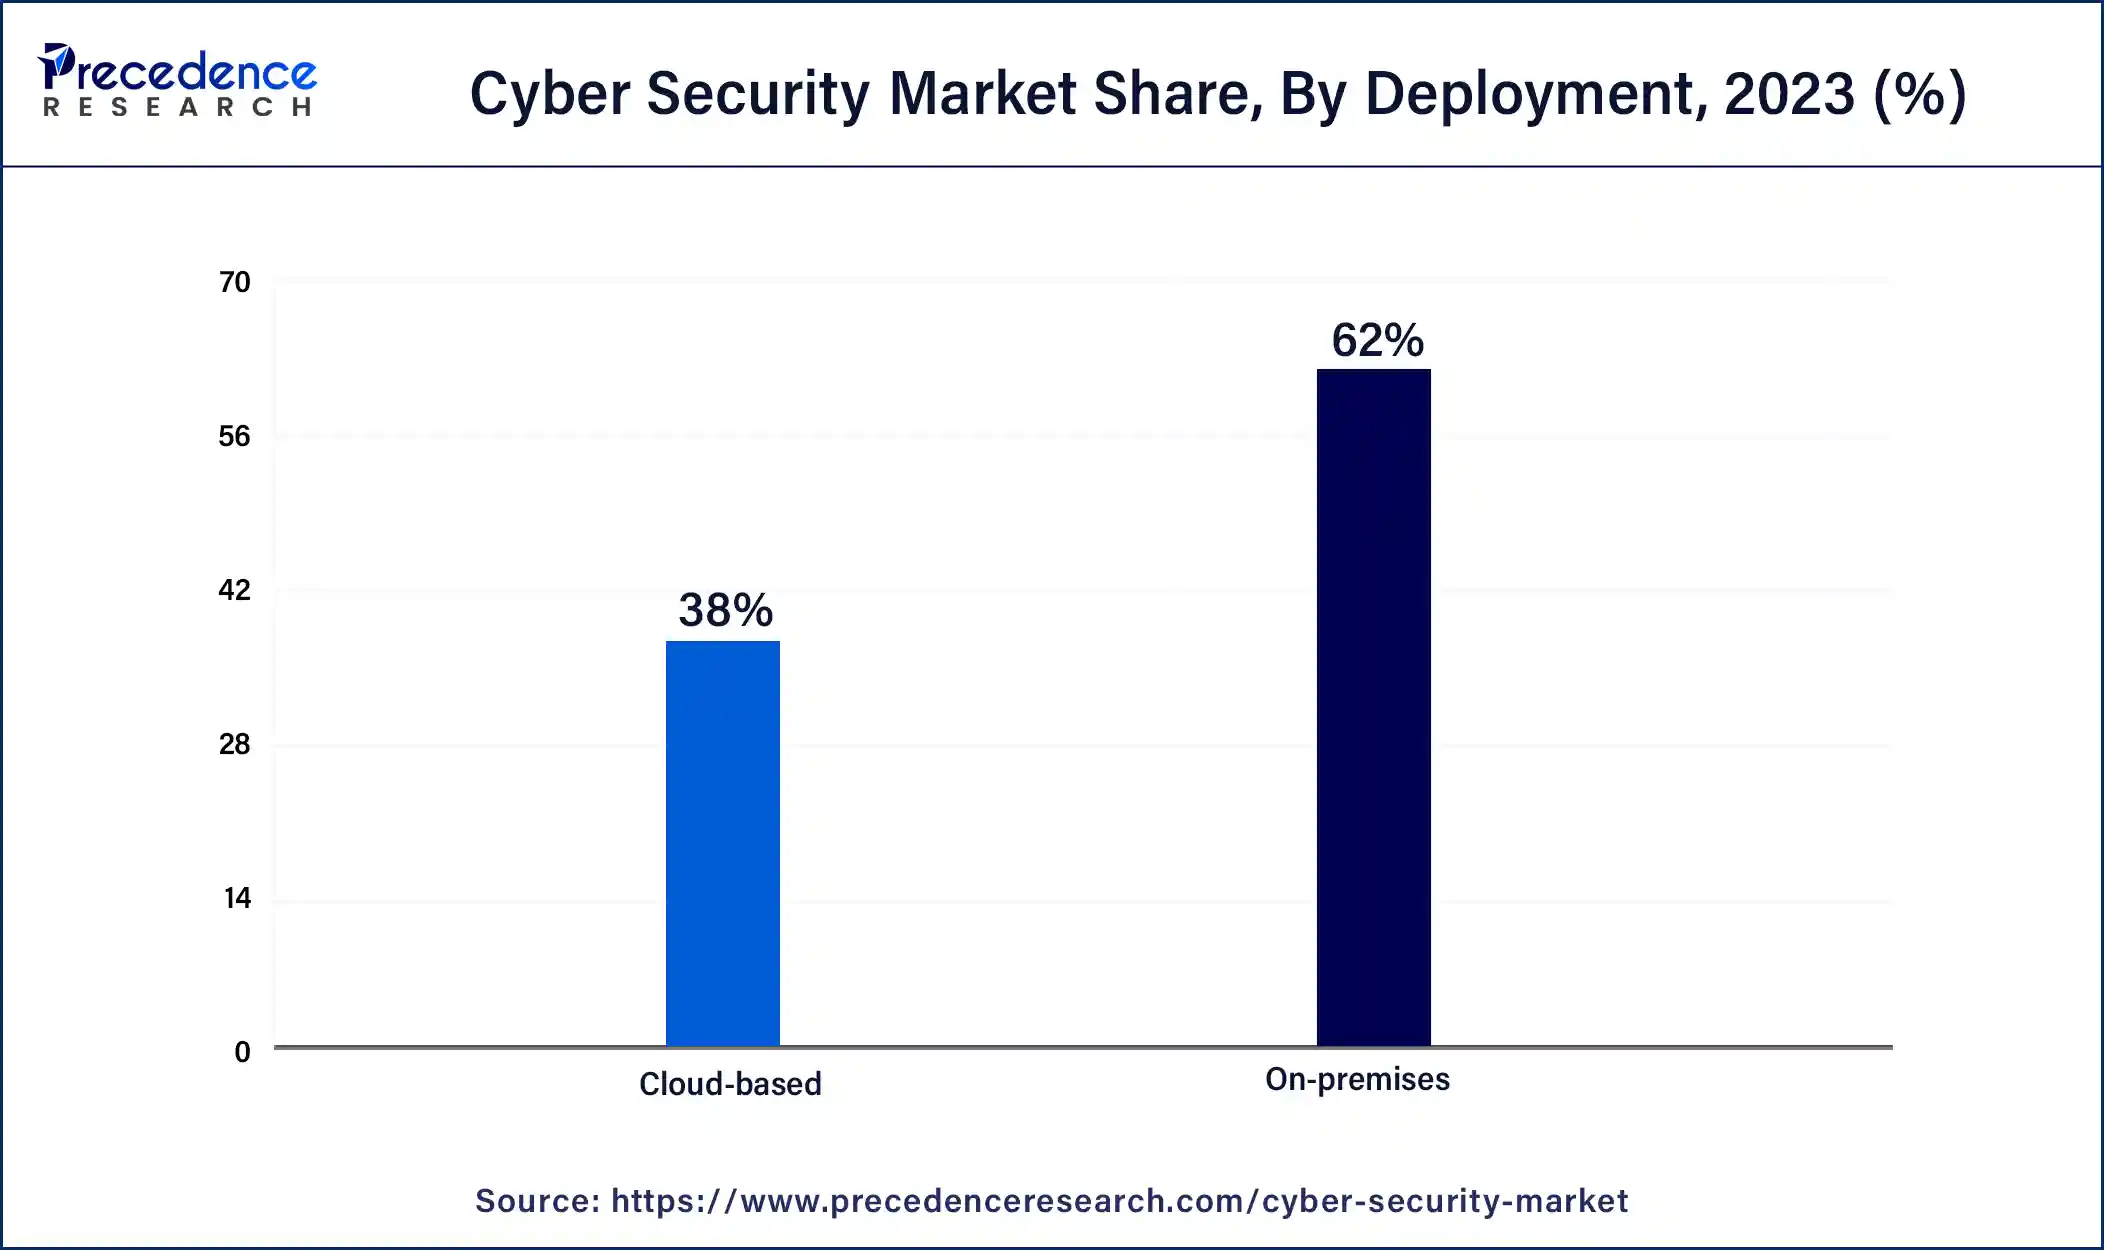 Cyber Security Market Share, By Deployment, 2023 (%)